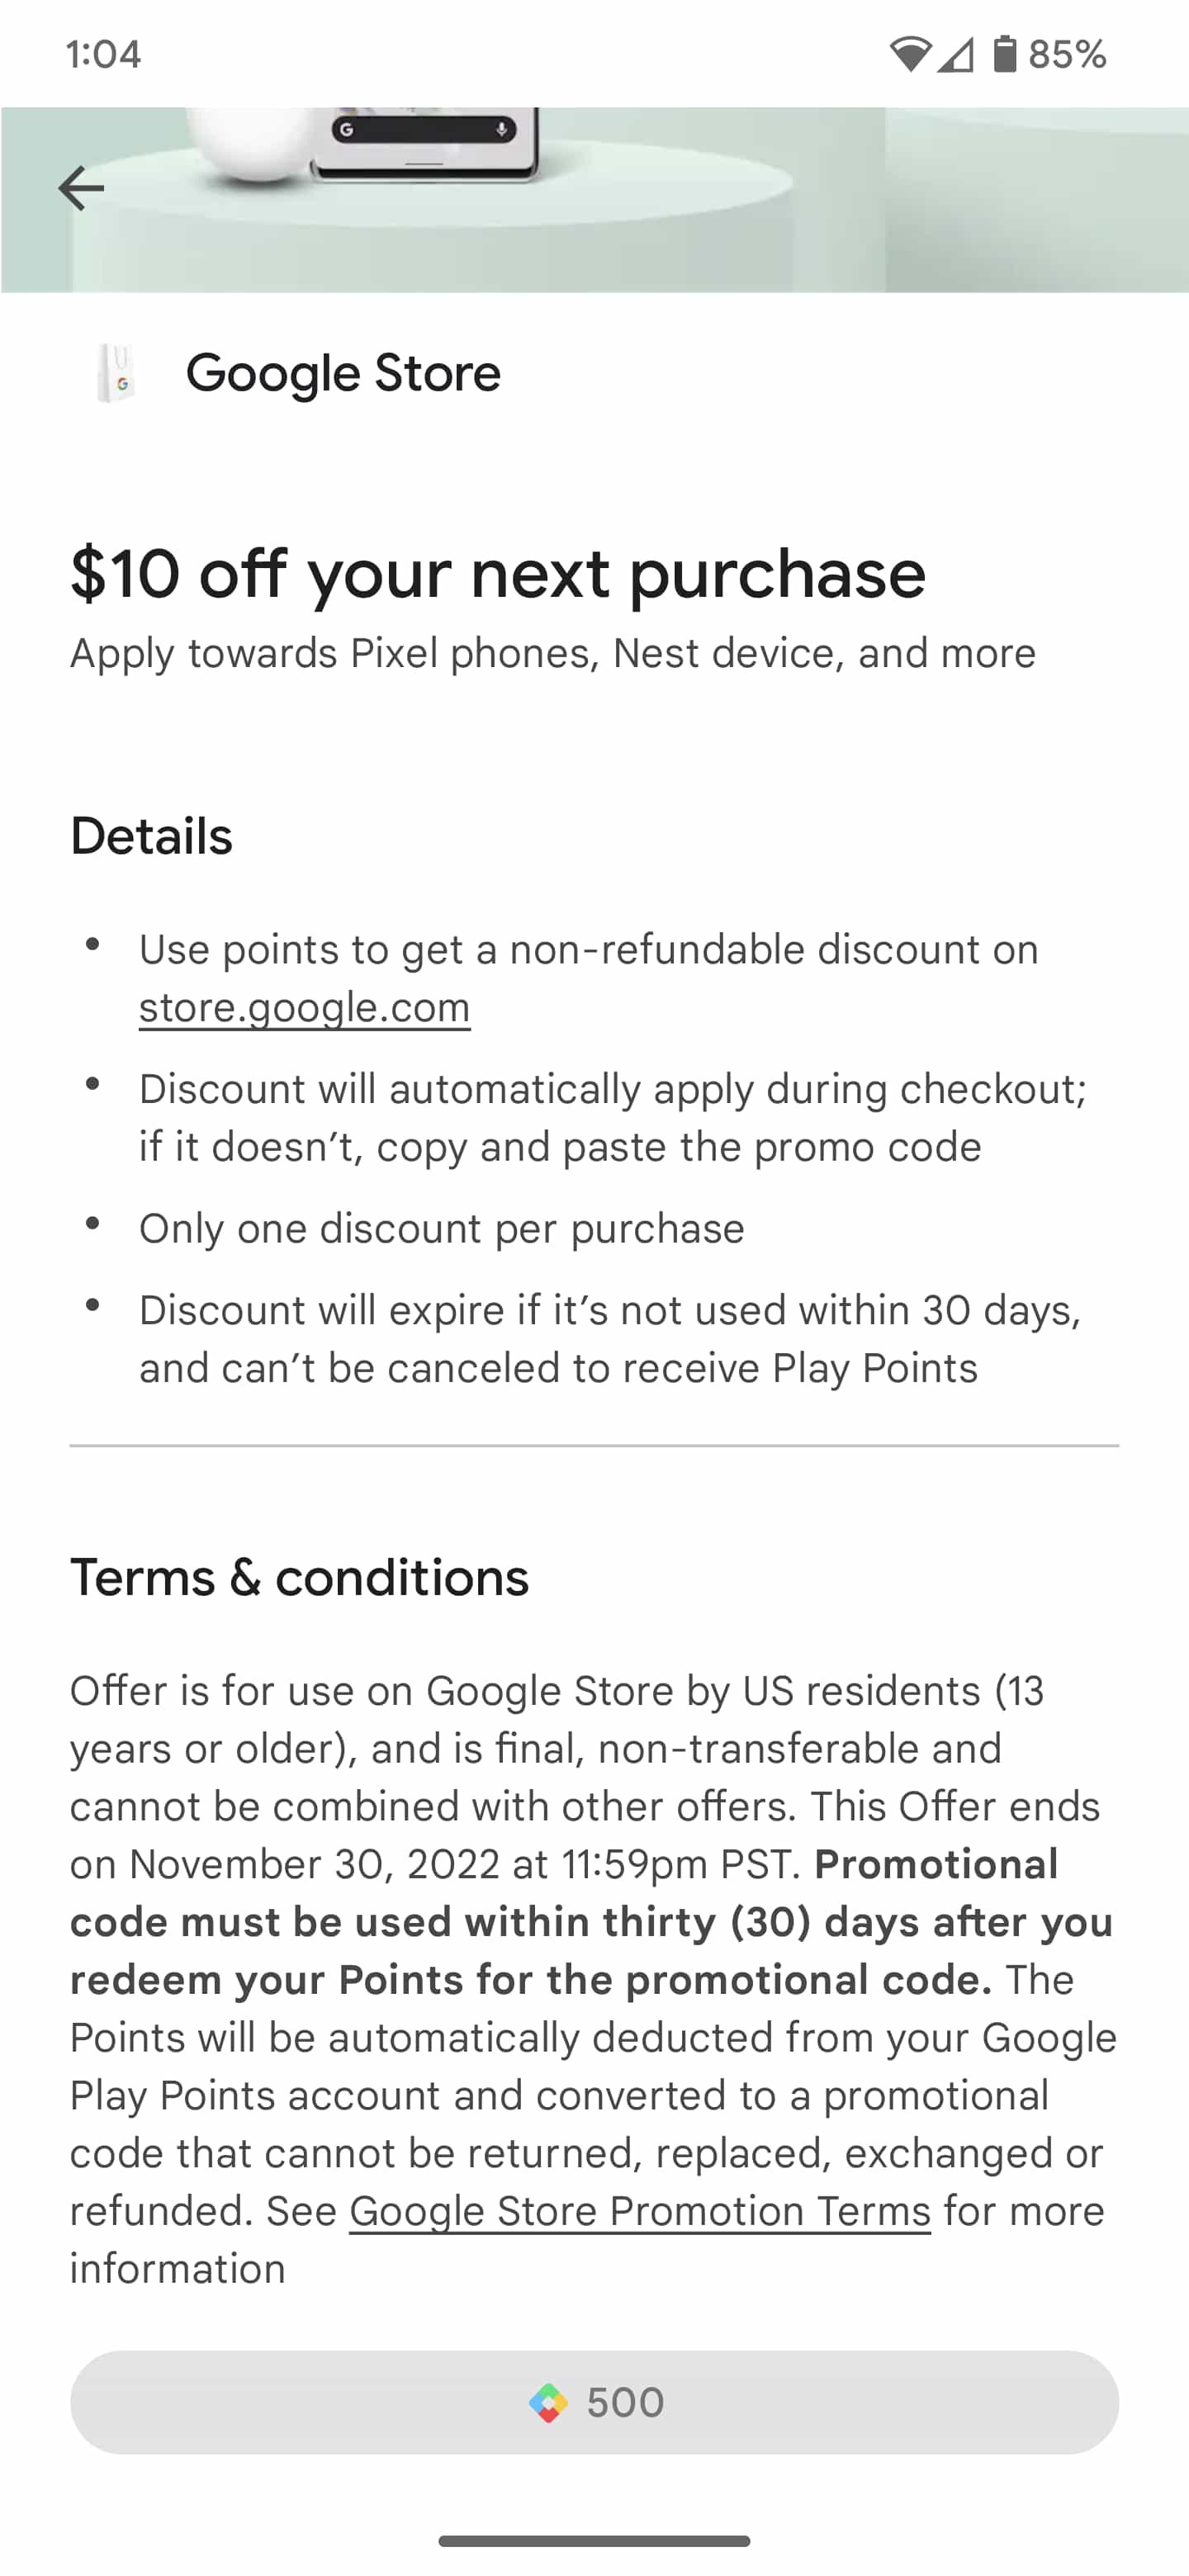 Offer details for redeeming 500 Play Points for $10 in Google Store discount